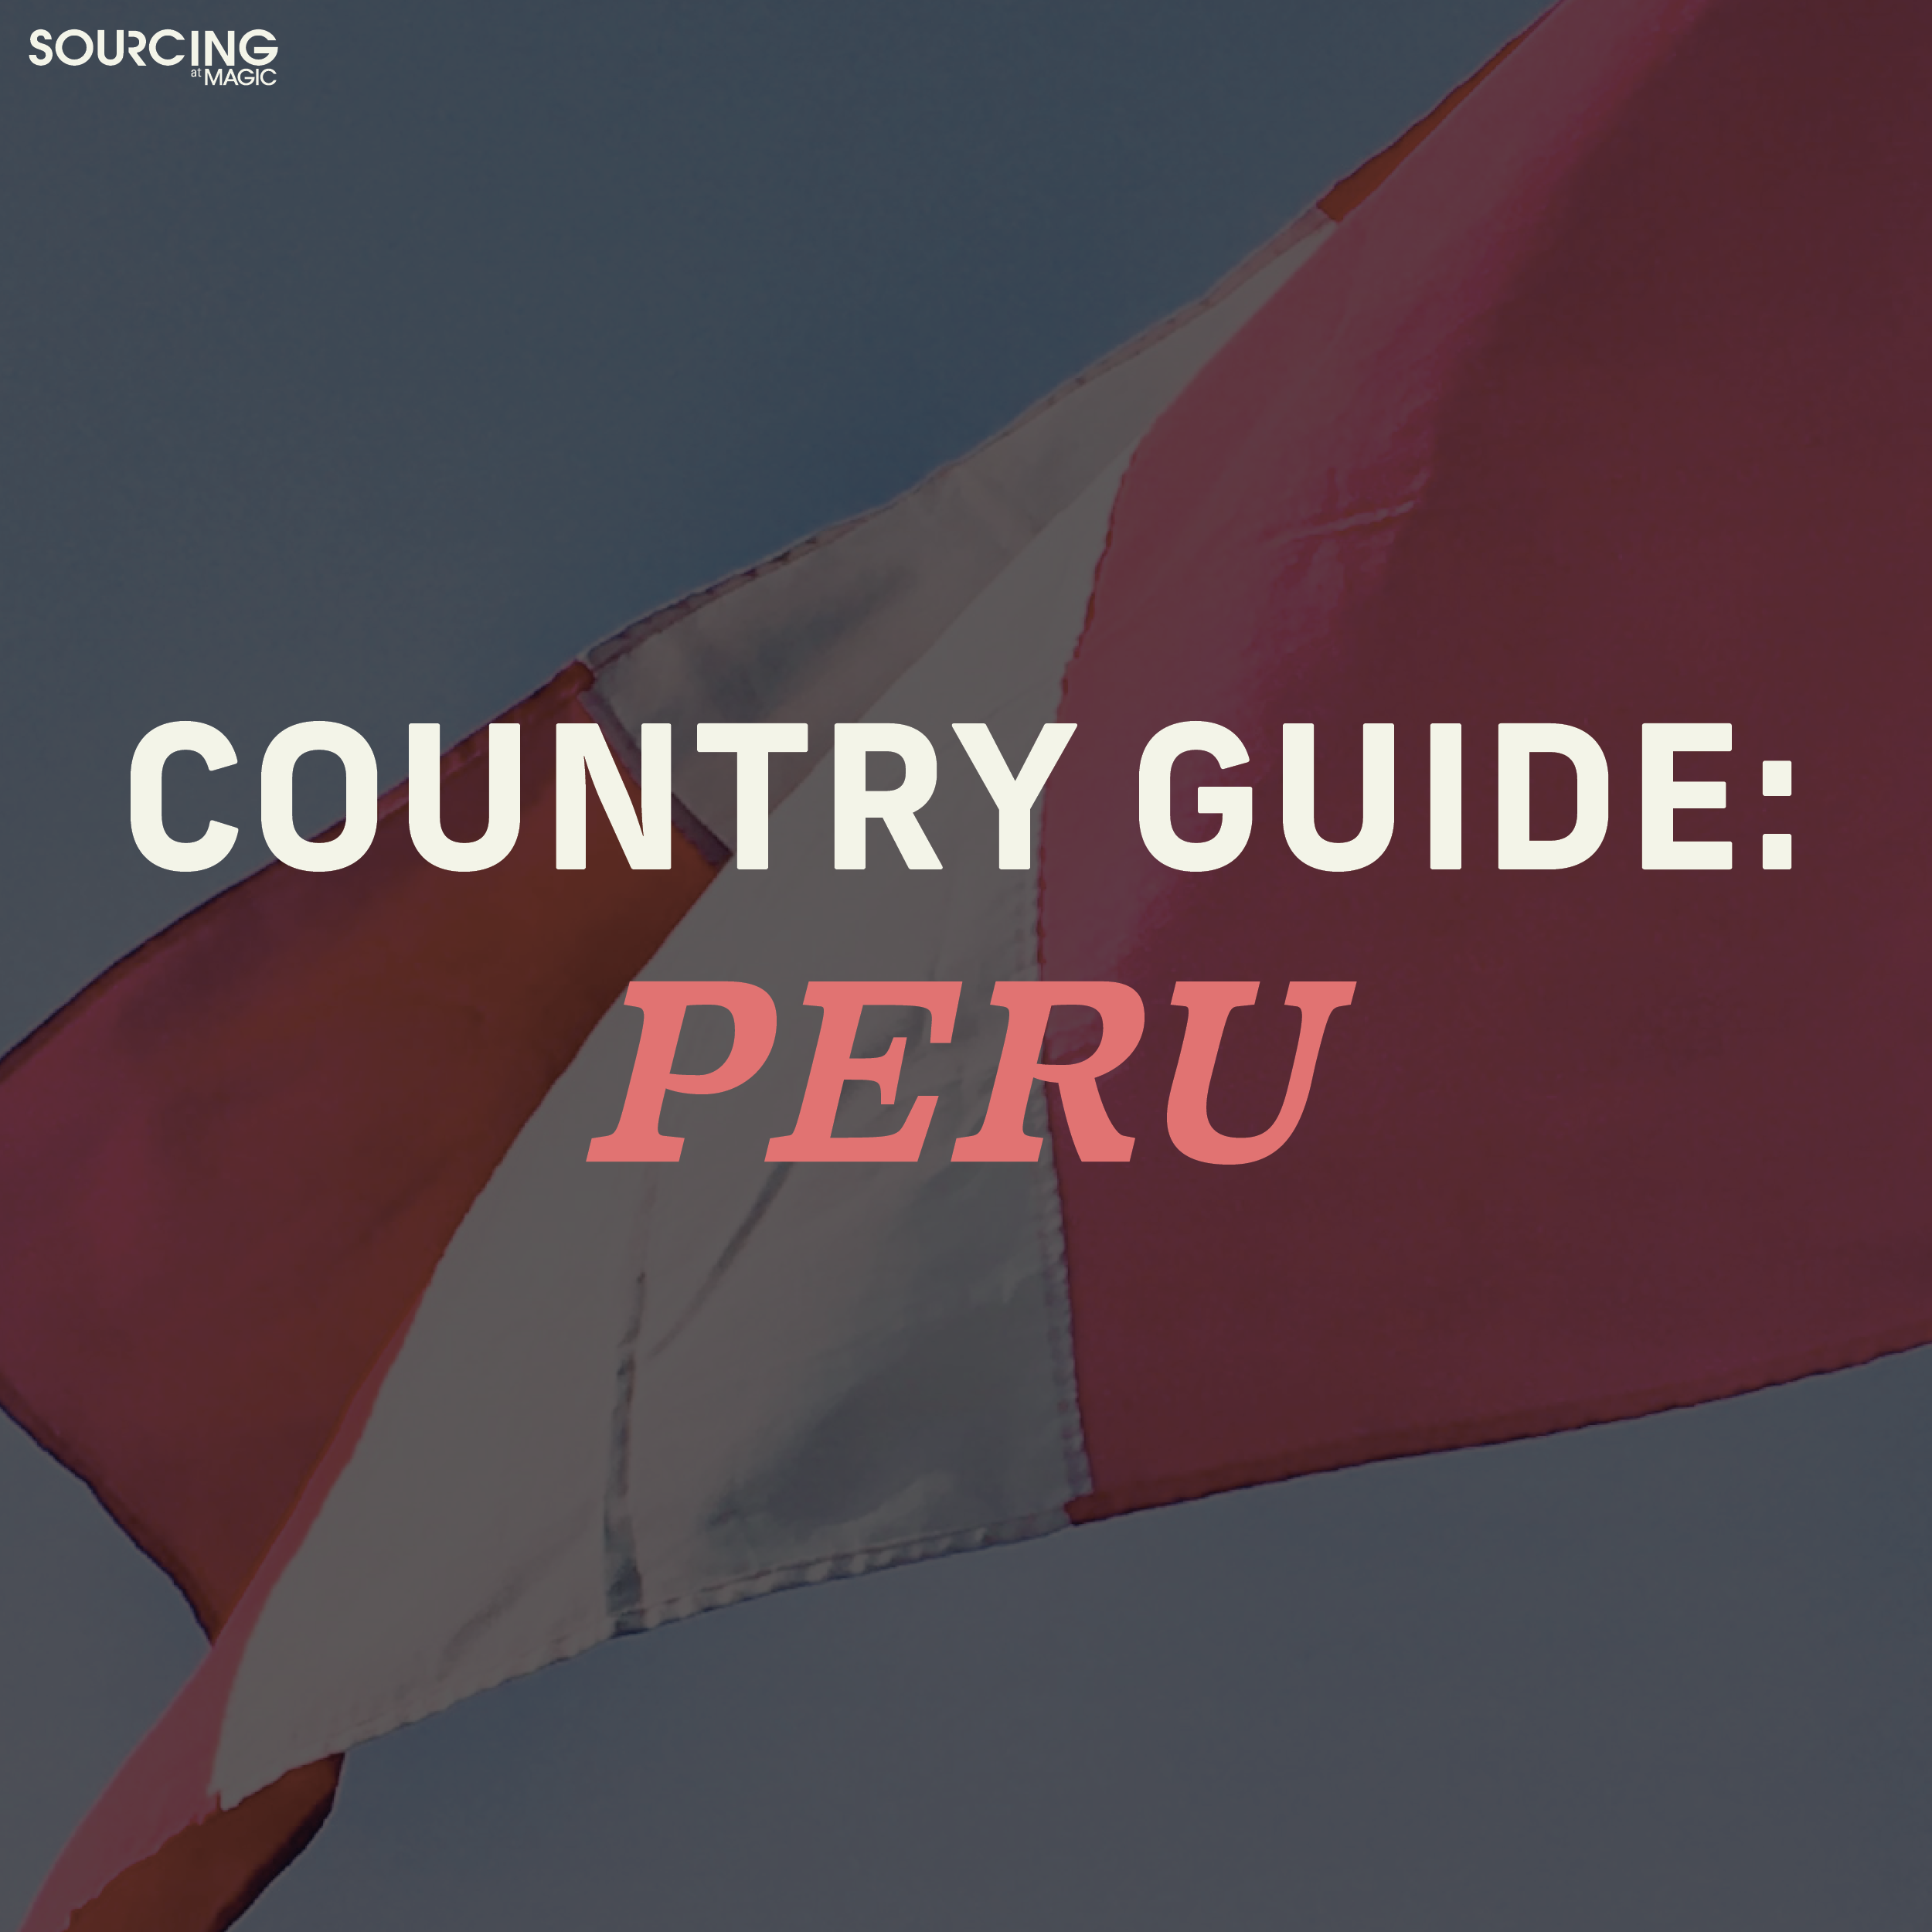 SOURCING at MAGIC: Country Guide - Peru